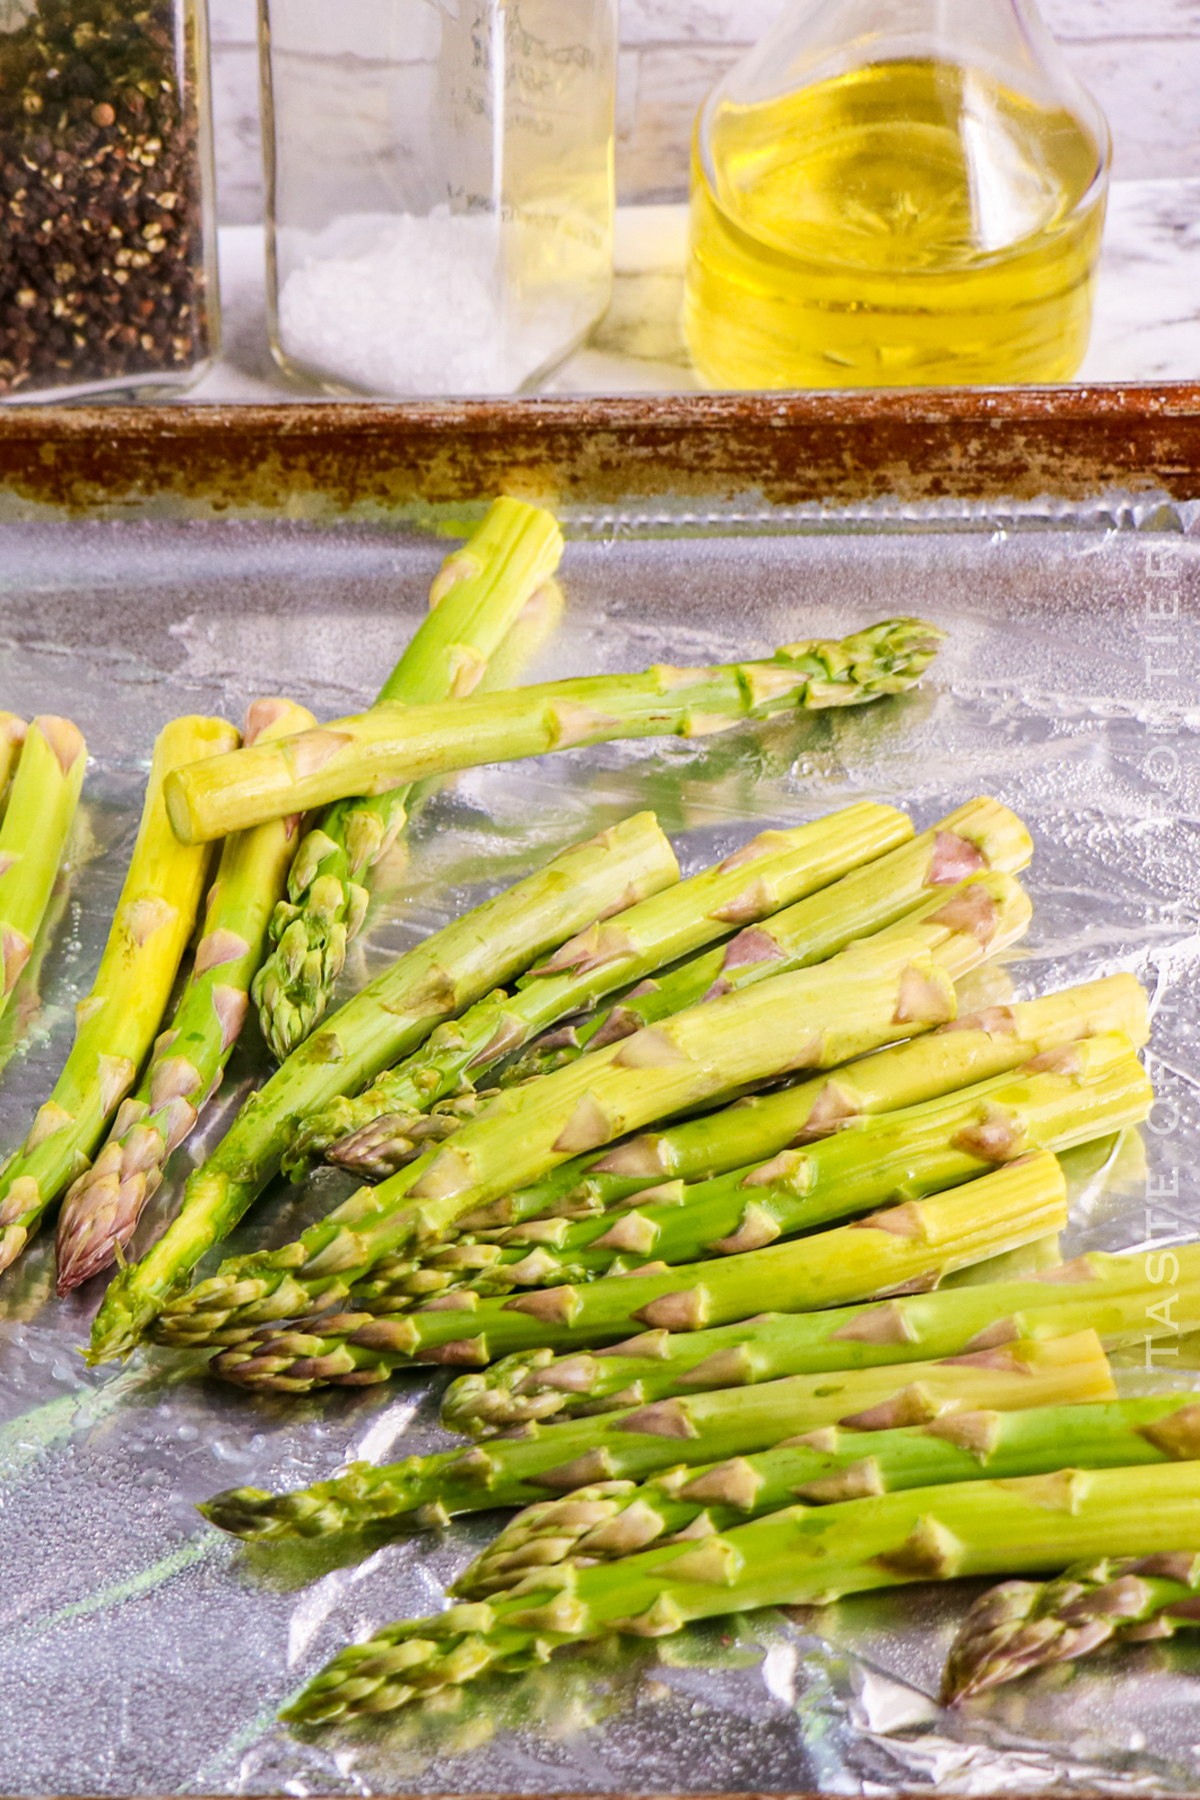 Ingredients for Oven Roasted Asparagus